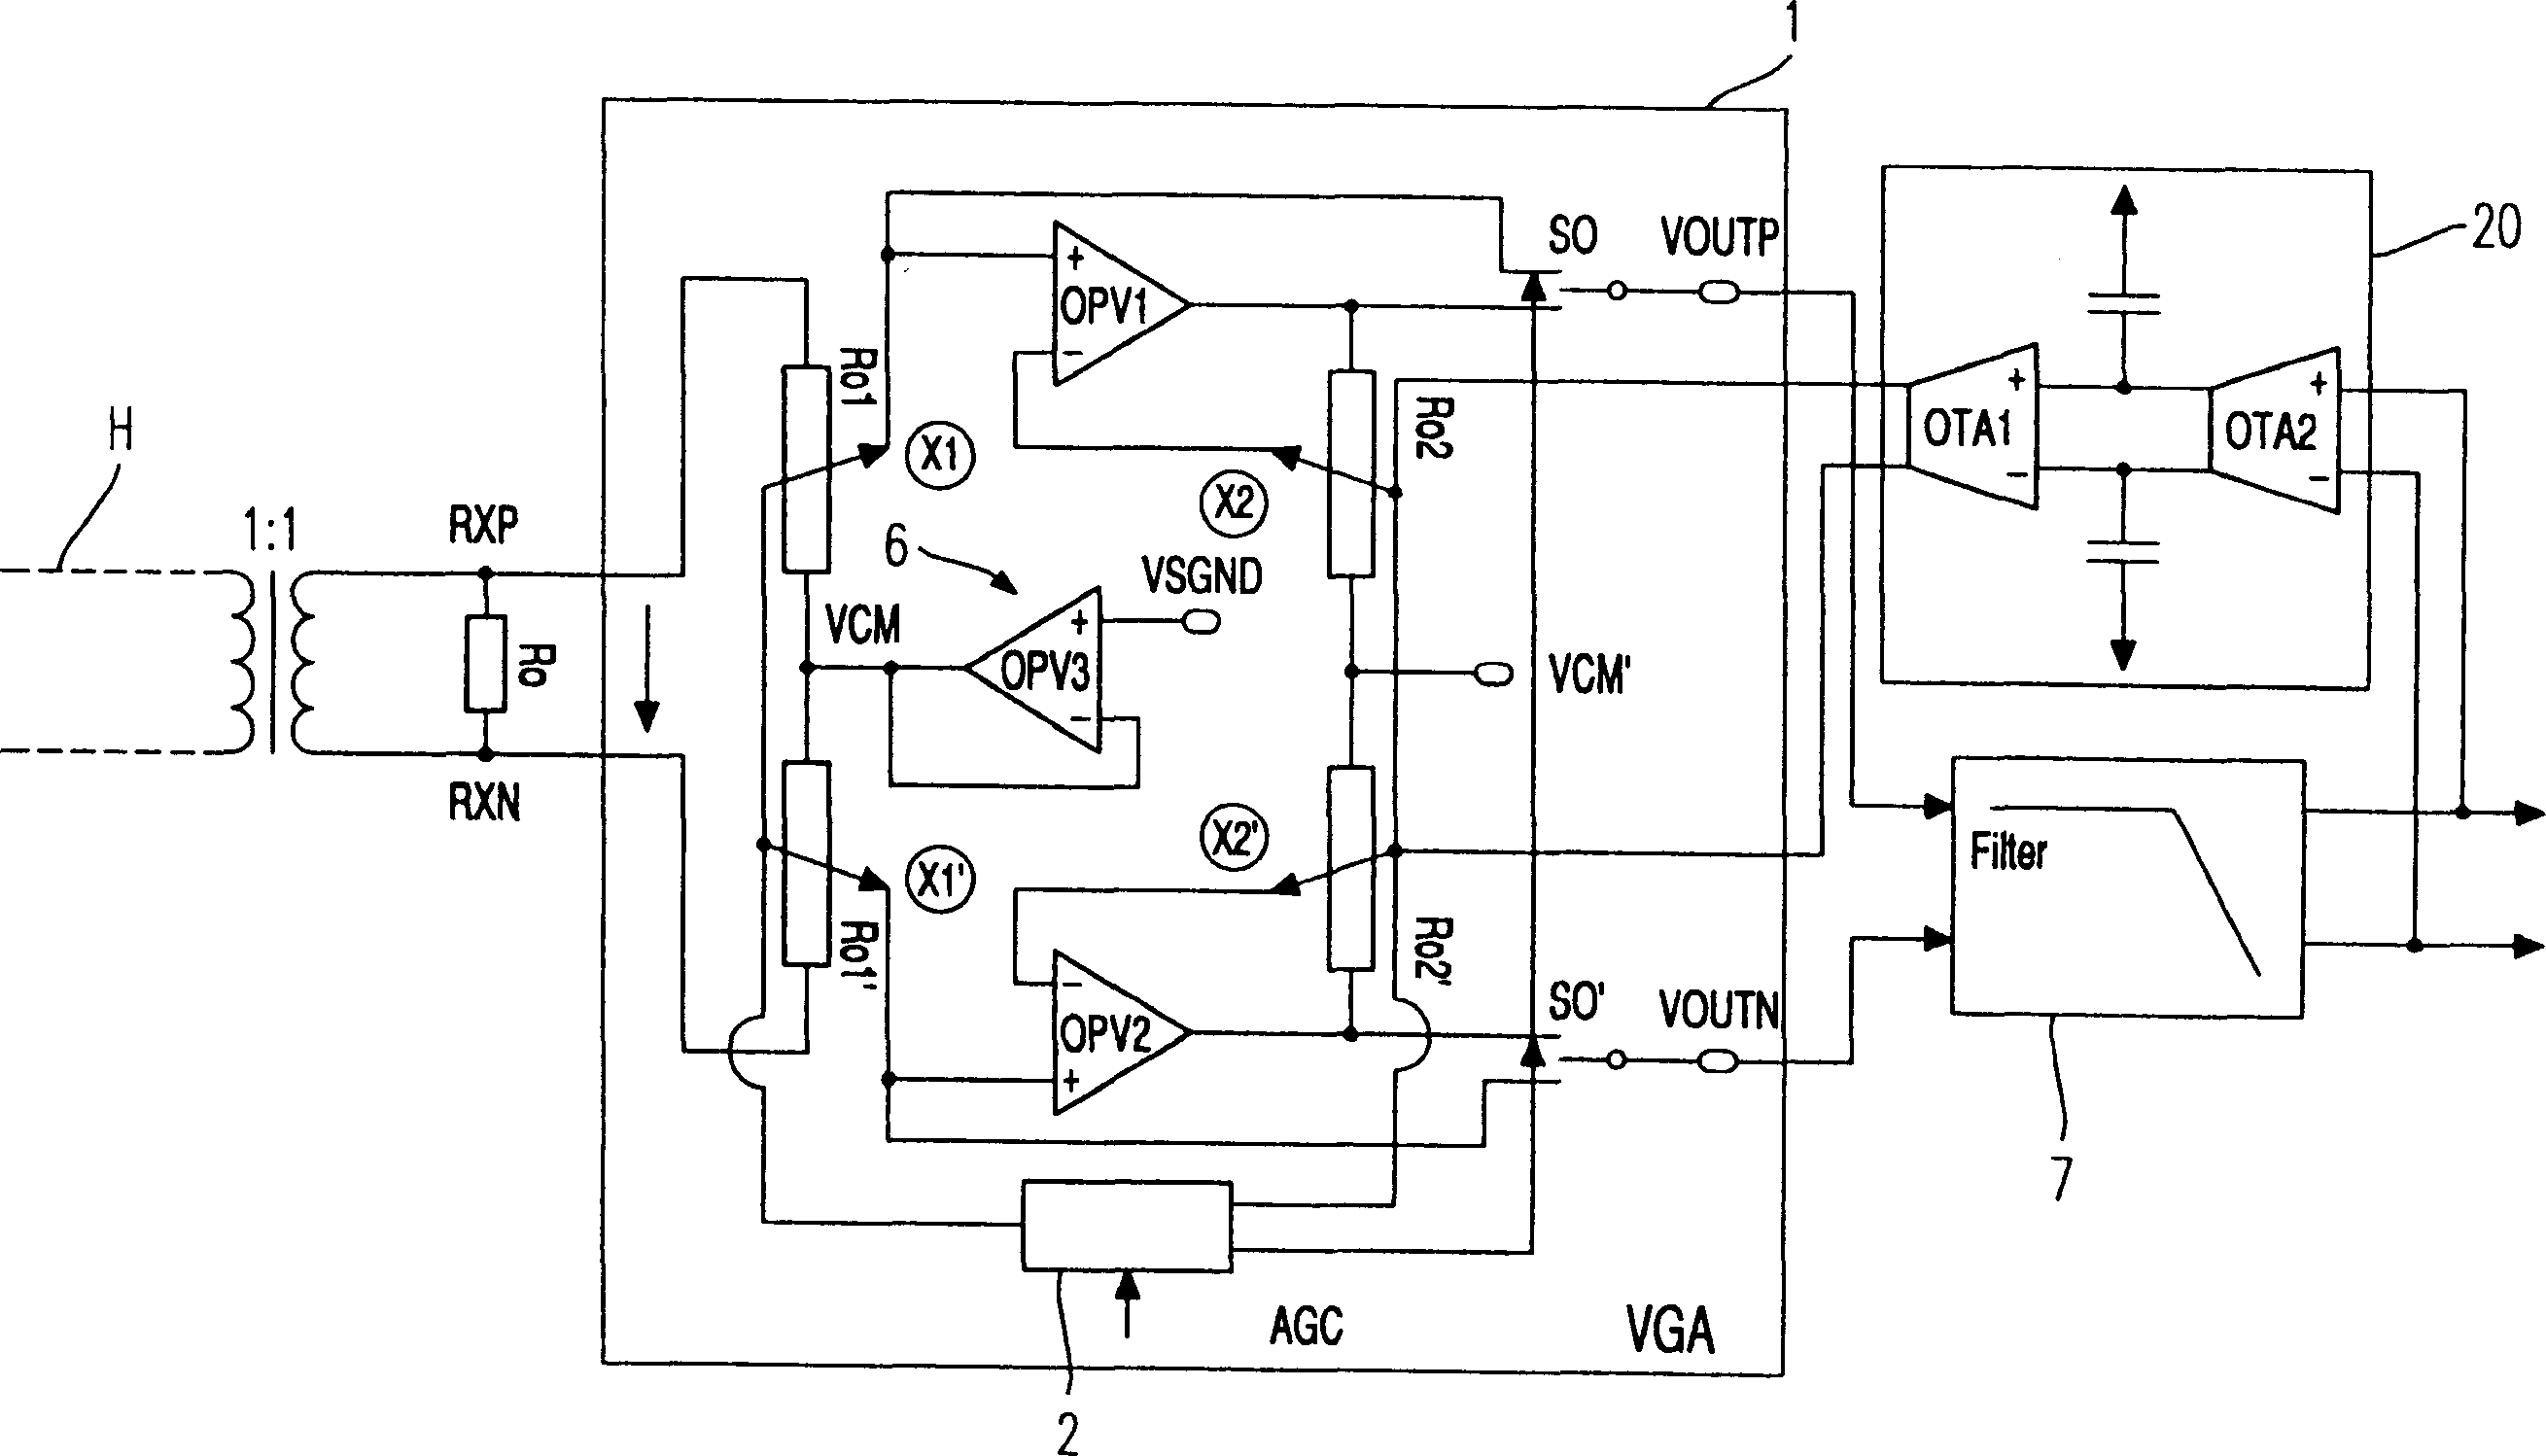 Db-linear variable gain amplifier (vga) stage with a high broad band